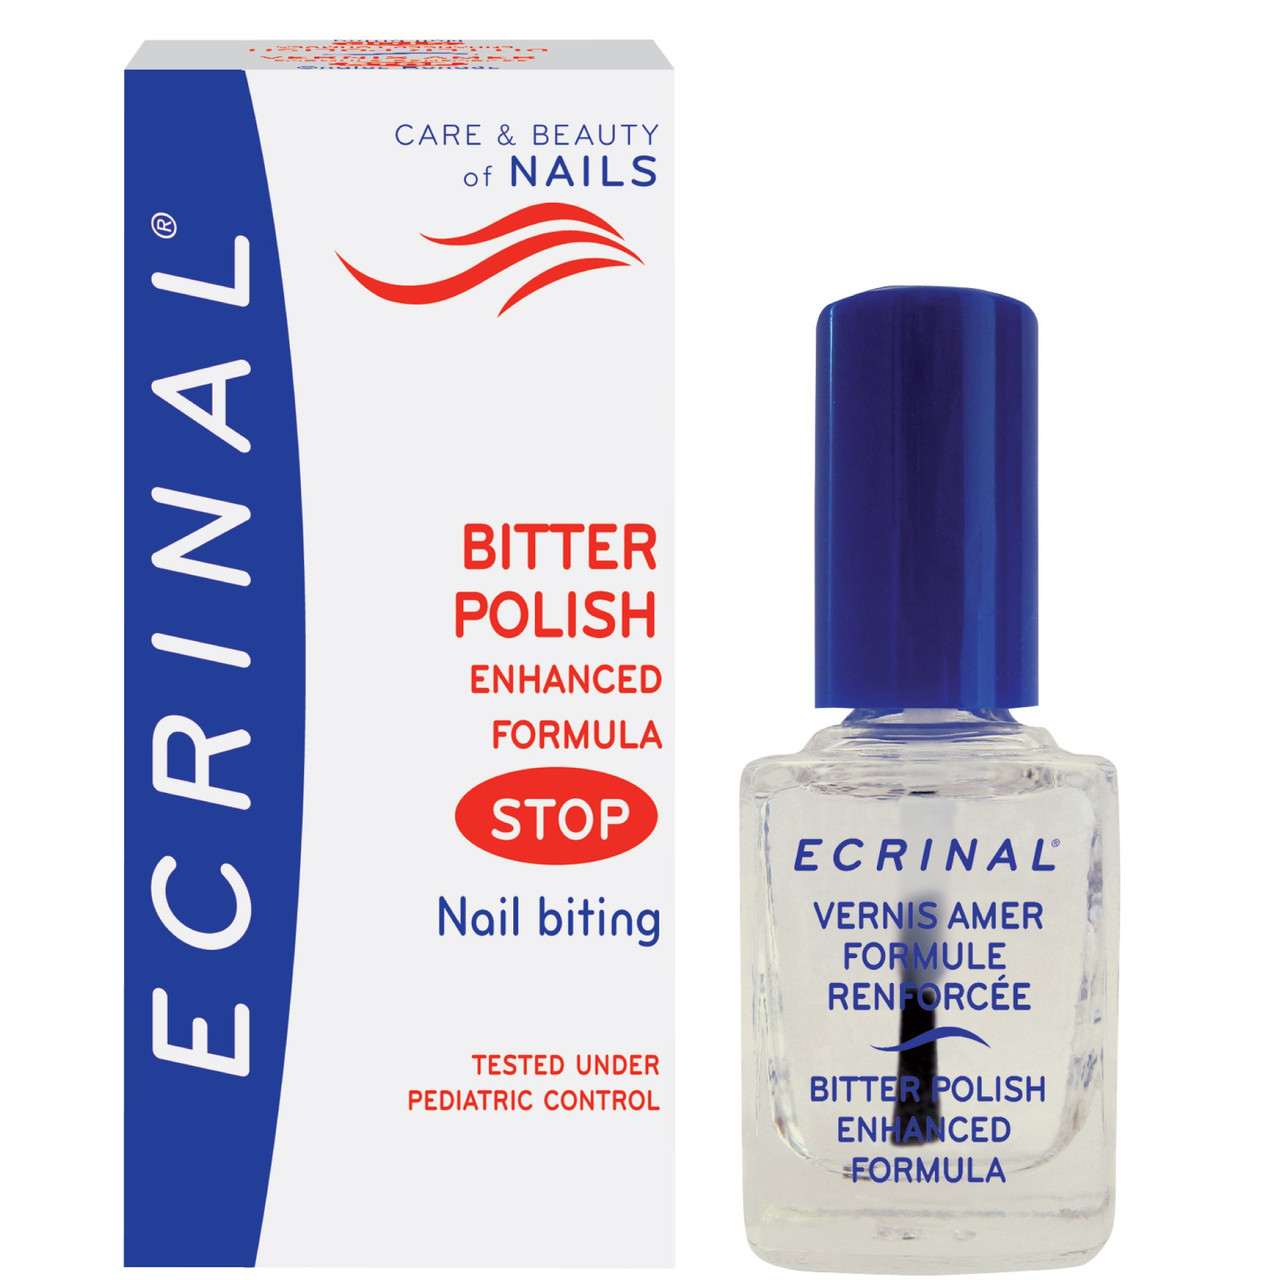 EFINITYER Nail-Biting-Treatment-for-Kids Anti-Bite-Nail-Polish-with-Bitter-Taste  Effectively-Stop-Biting-Nails-and-Thumb-Sucking Green 1 Count (OLIN28711)